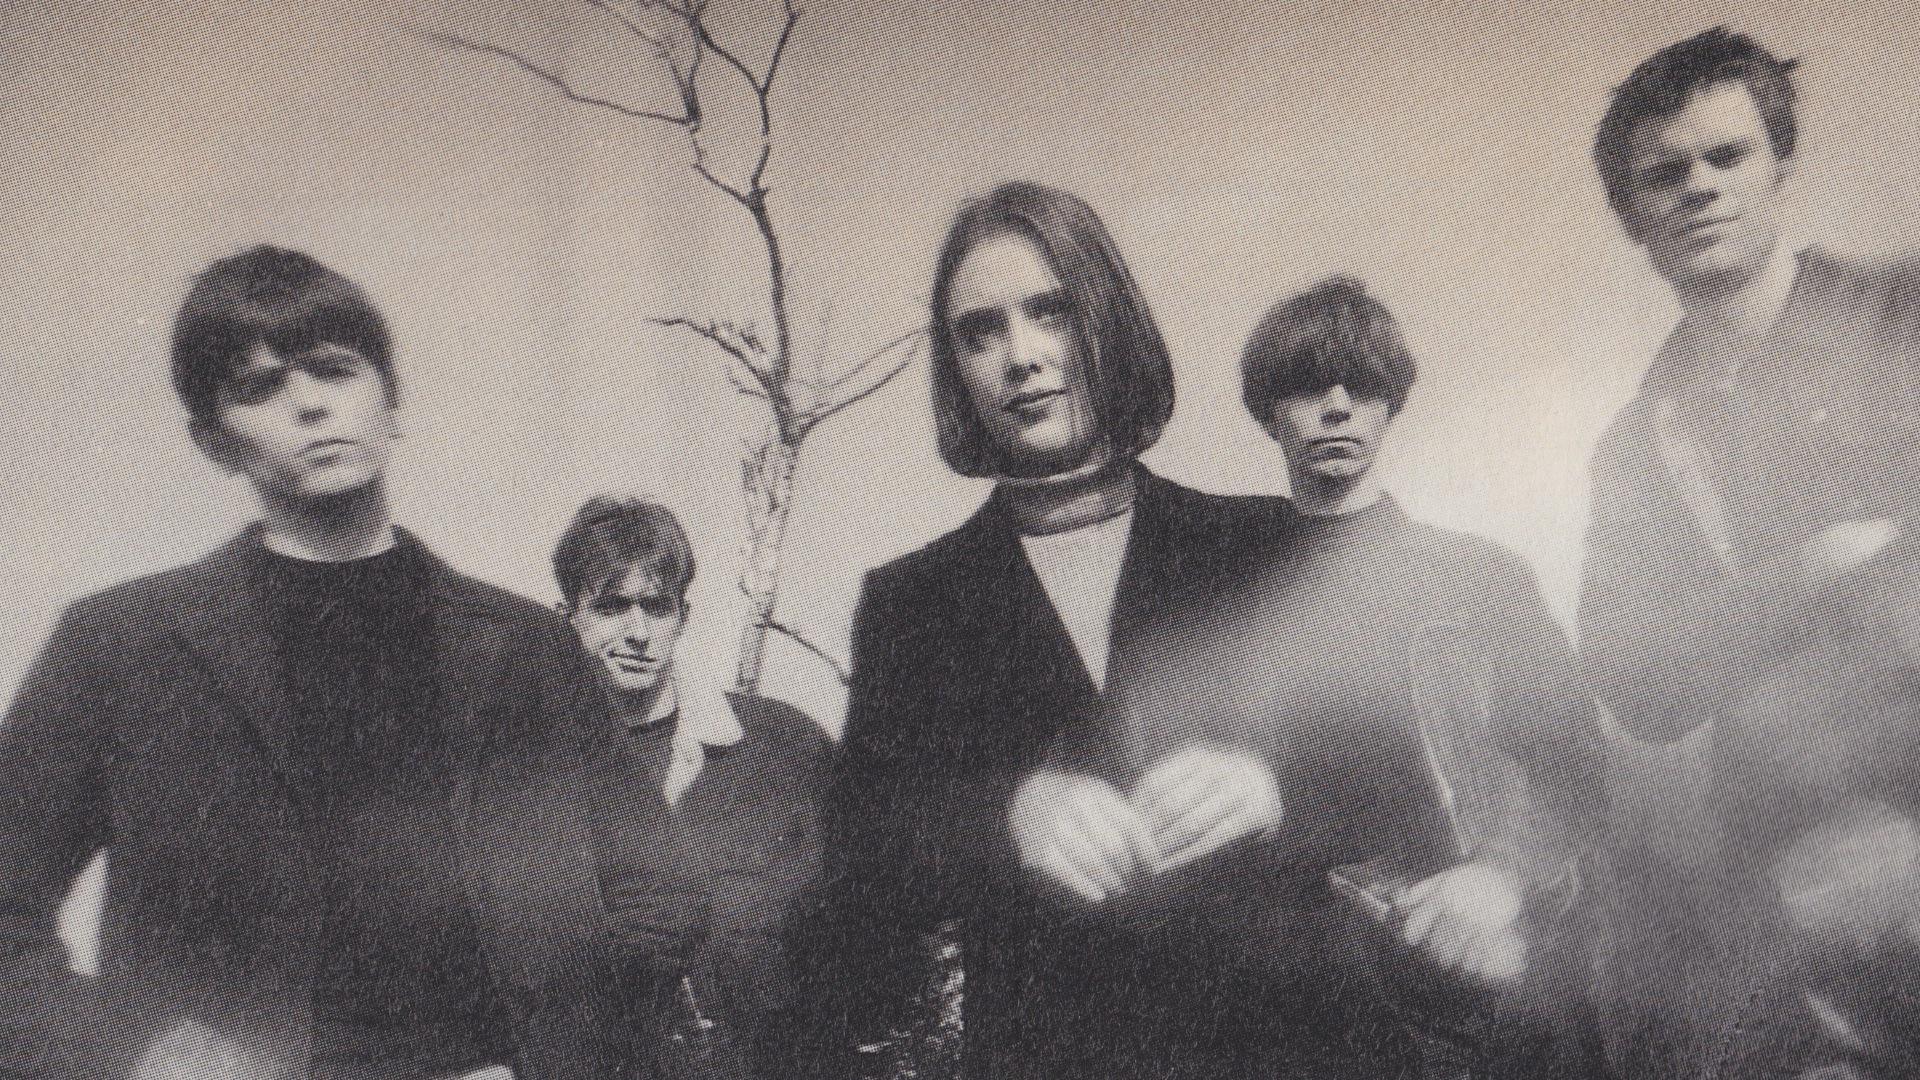 Slowdive Wallpapers